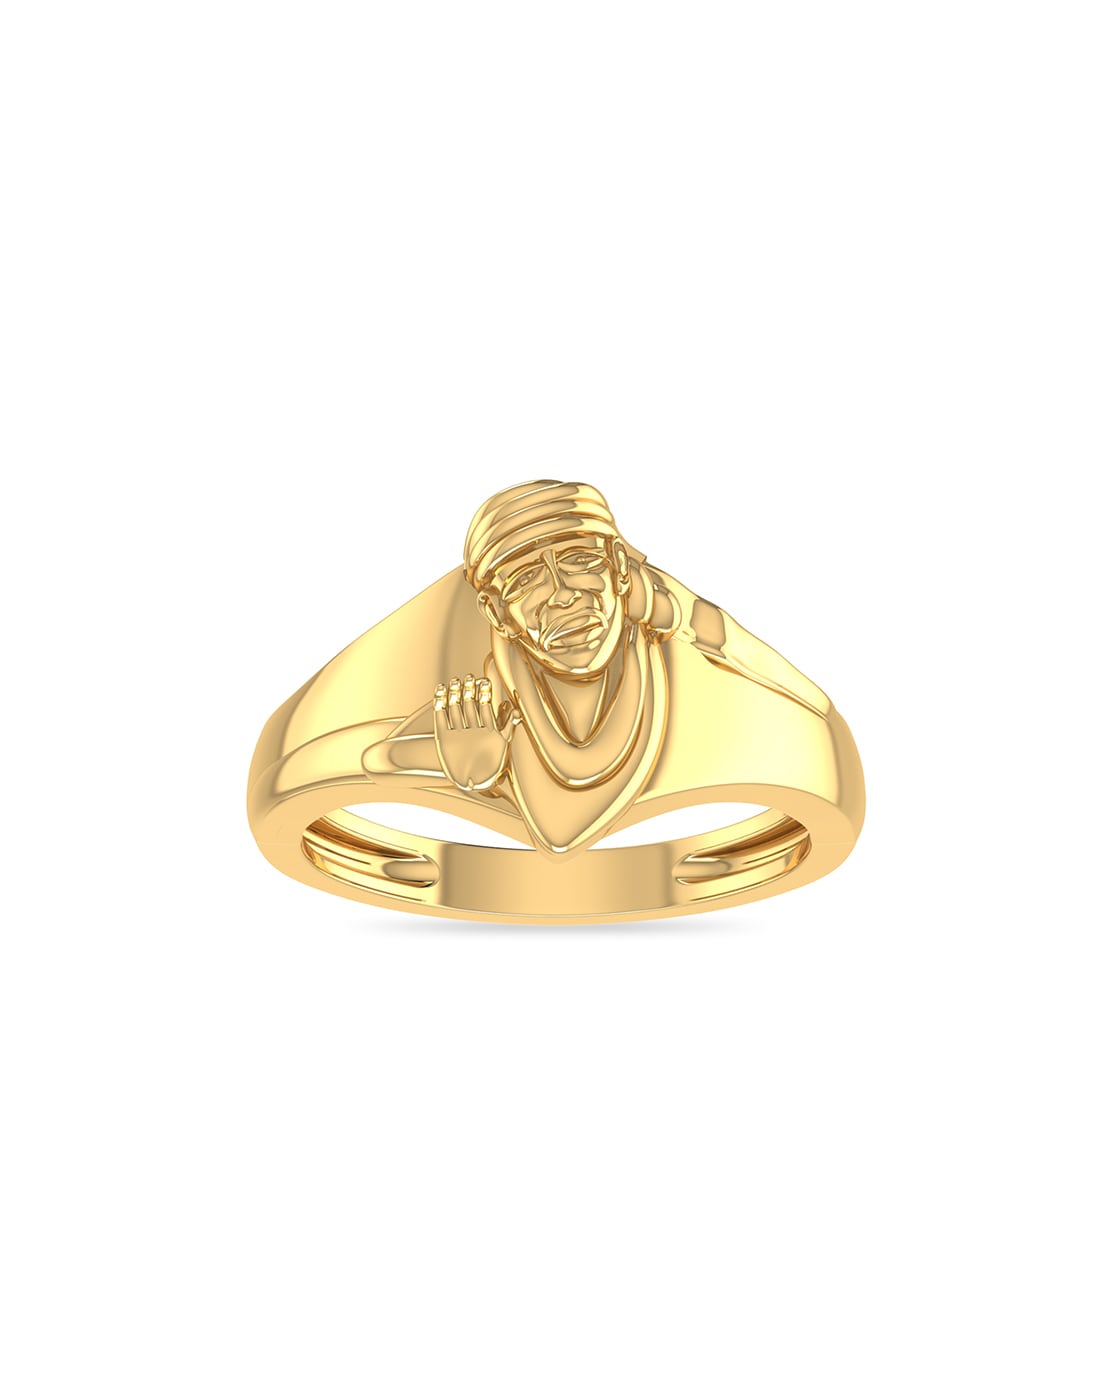 St Jude Patron Saint of Hope & Impossible Causes Signet Ring - Gold - Luna  & Rose Jewellery